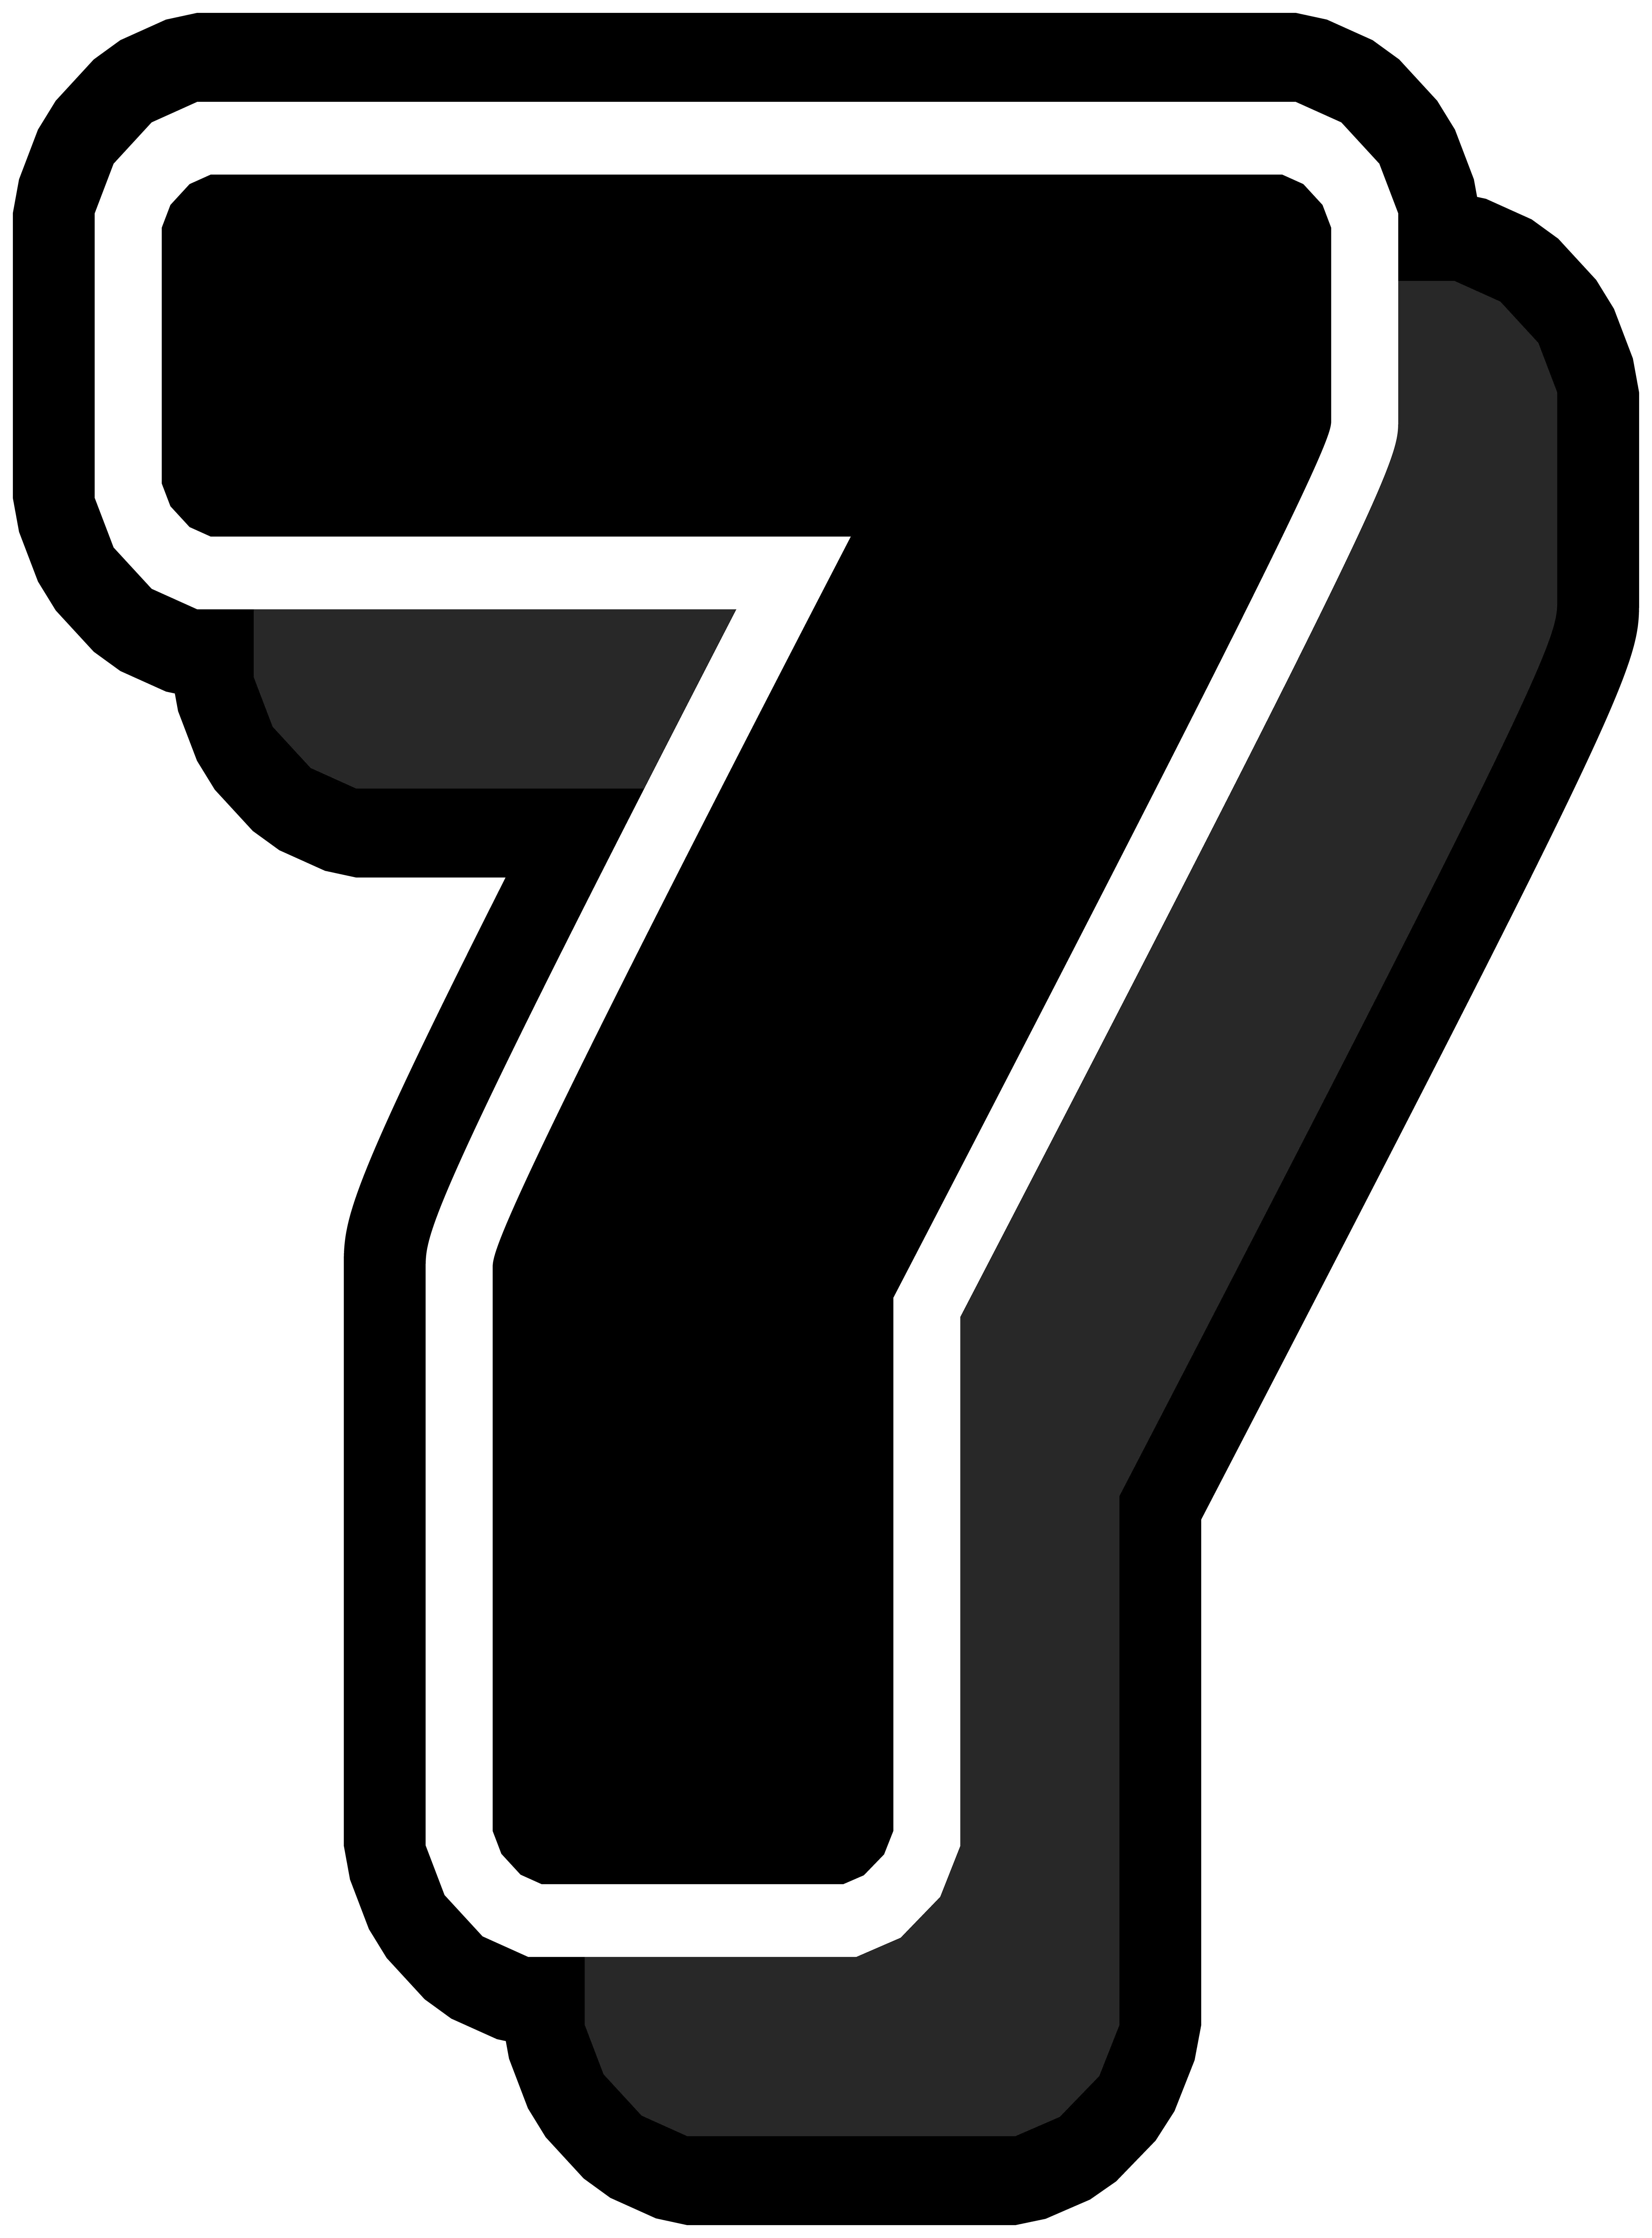 Seven Black Number Png Clipart Gallery Yopriceville High Quality Images And Transparent Png Free Clipart